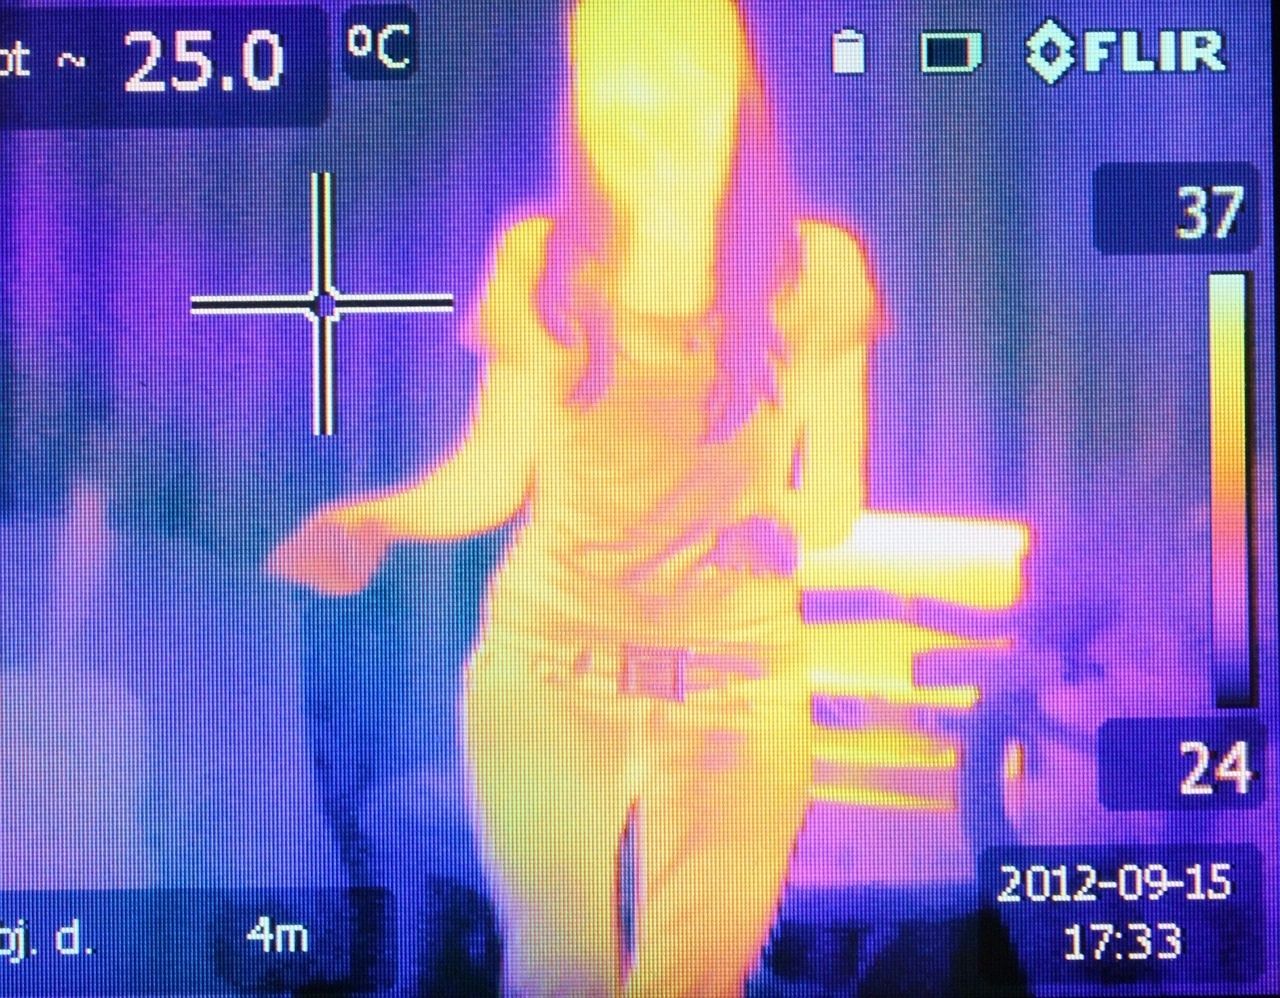 Thermal image of a person